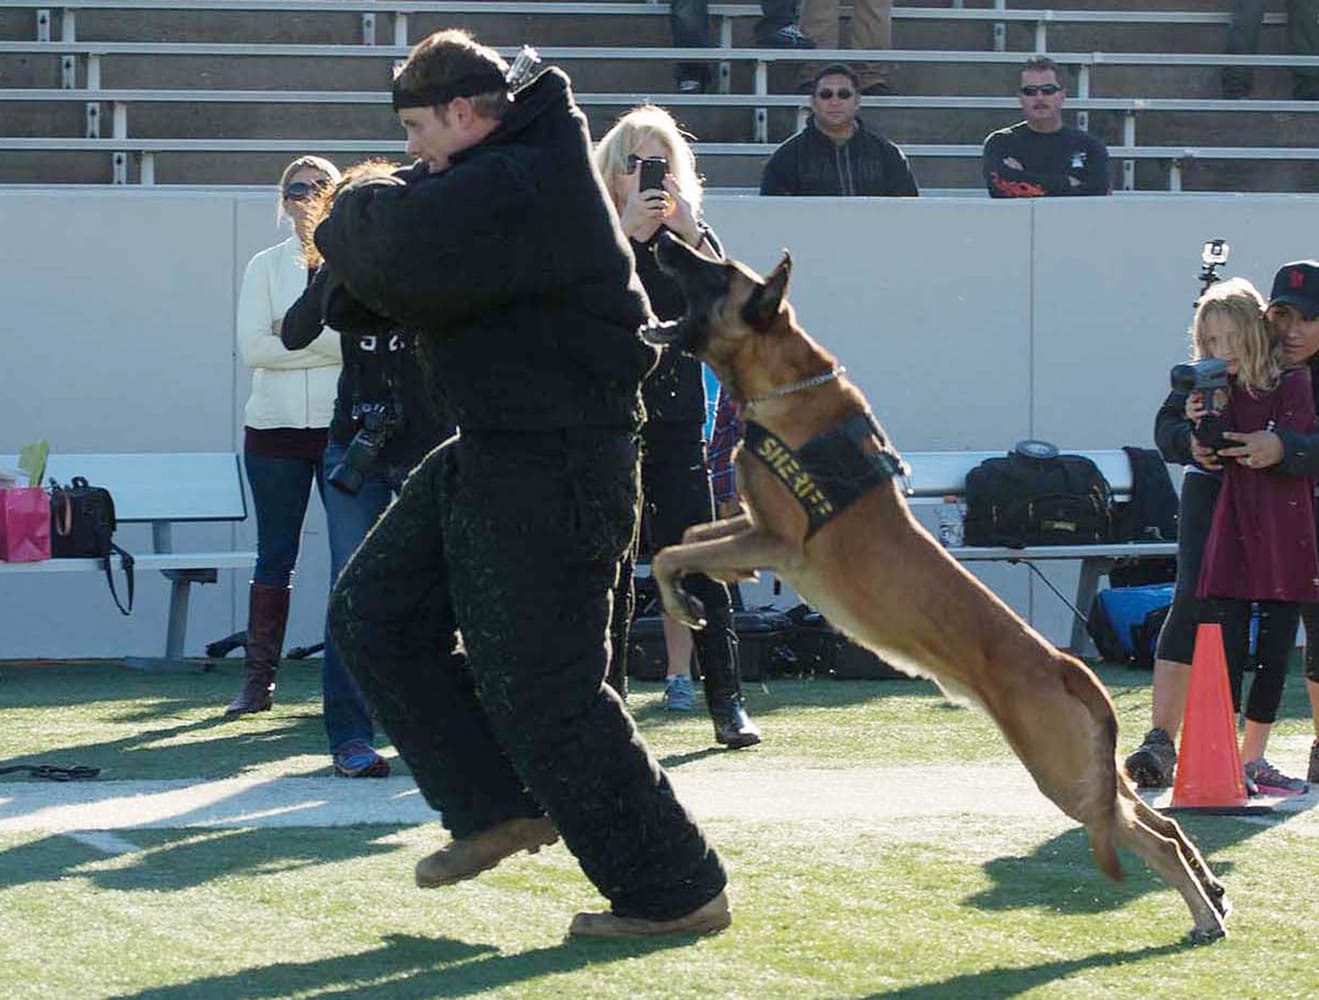 Security dog Sjors takes down a human decoy at the Texas K9 Officers Conference &amp; Trials in Houston.